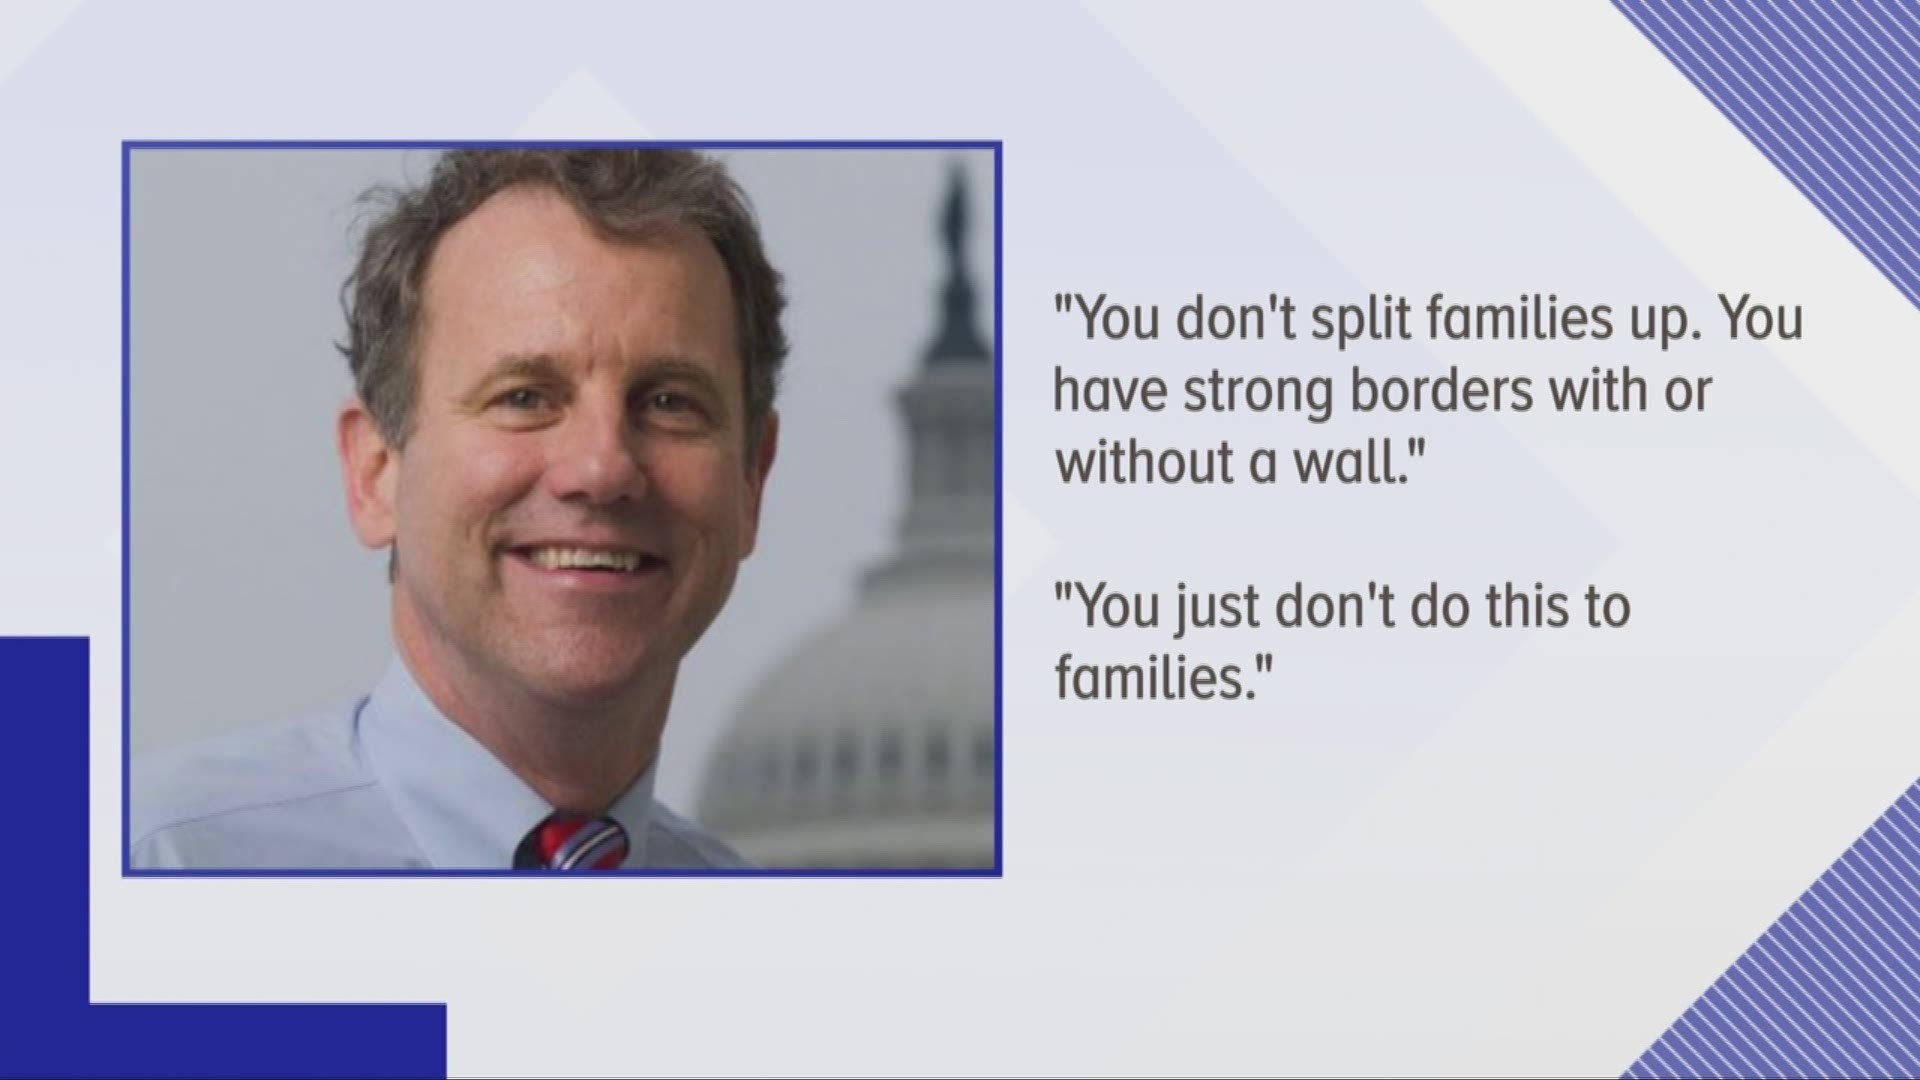 As border separation debate grows, Ohio's lawmakers weigh in 